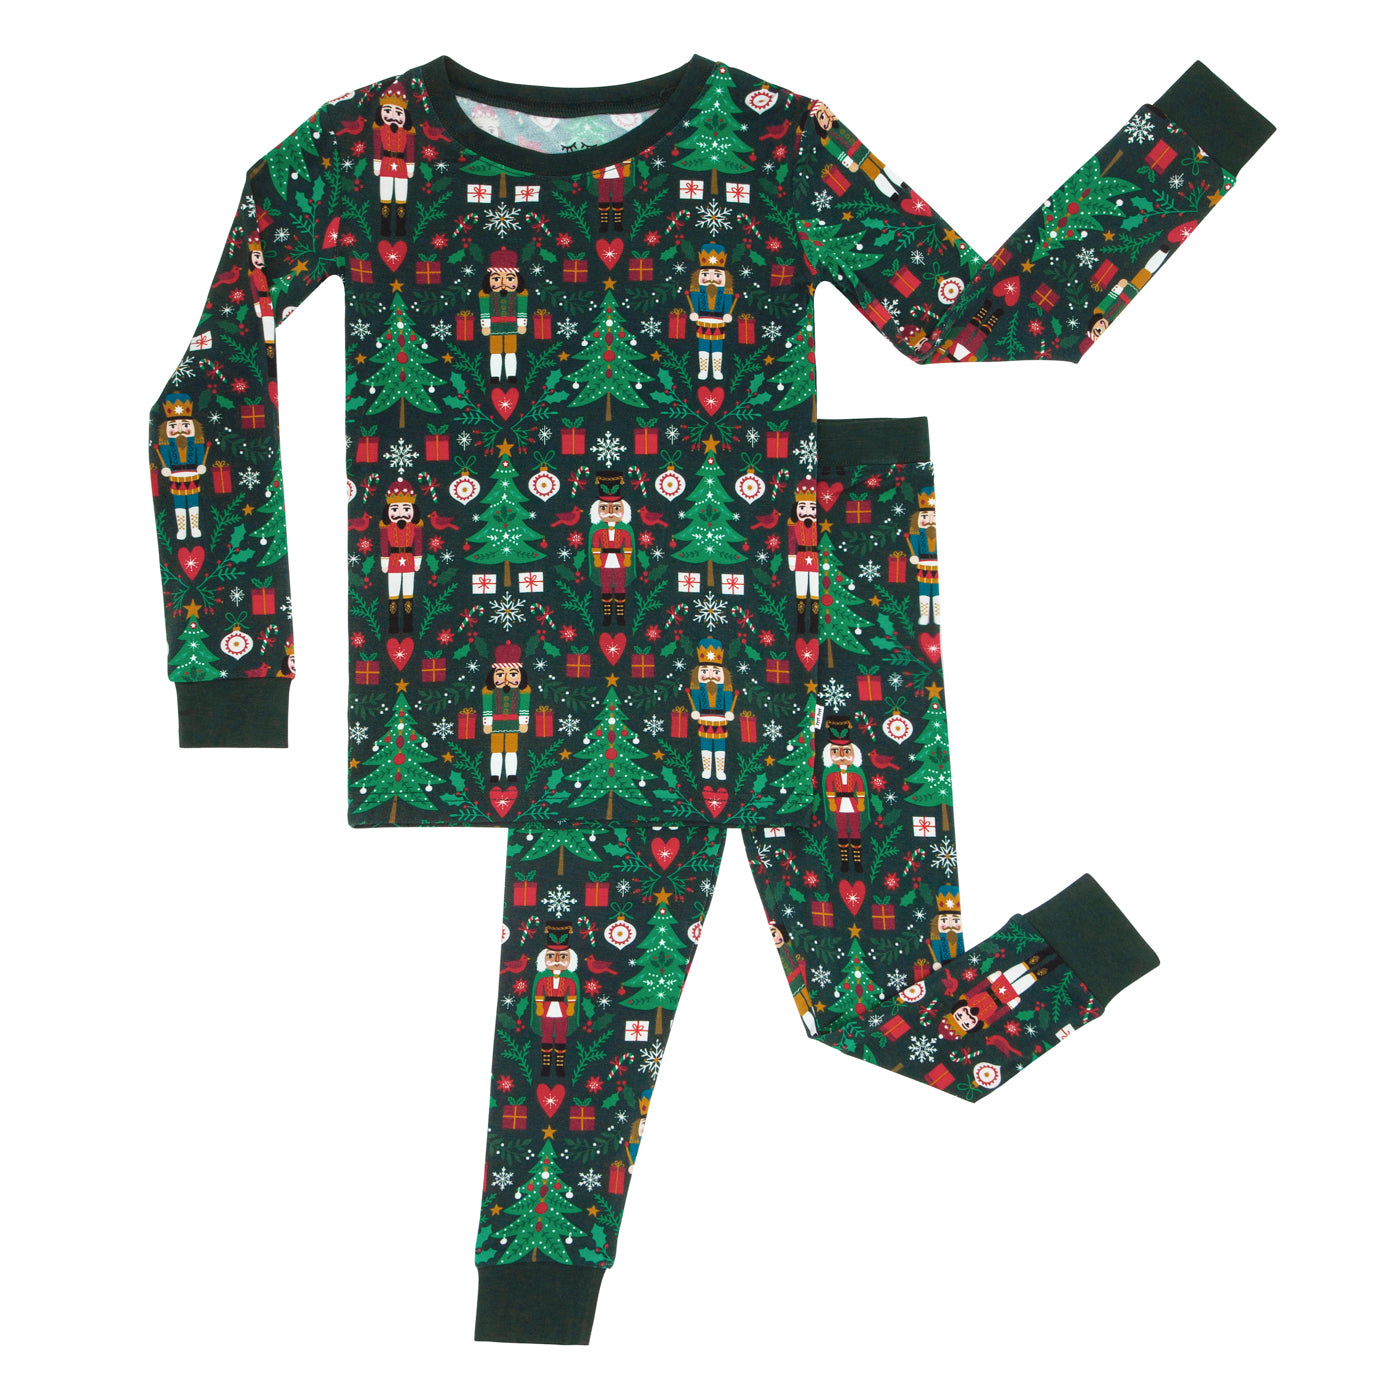 Flat lay image of a Night at the Nutcracker two piece pajama set